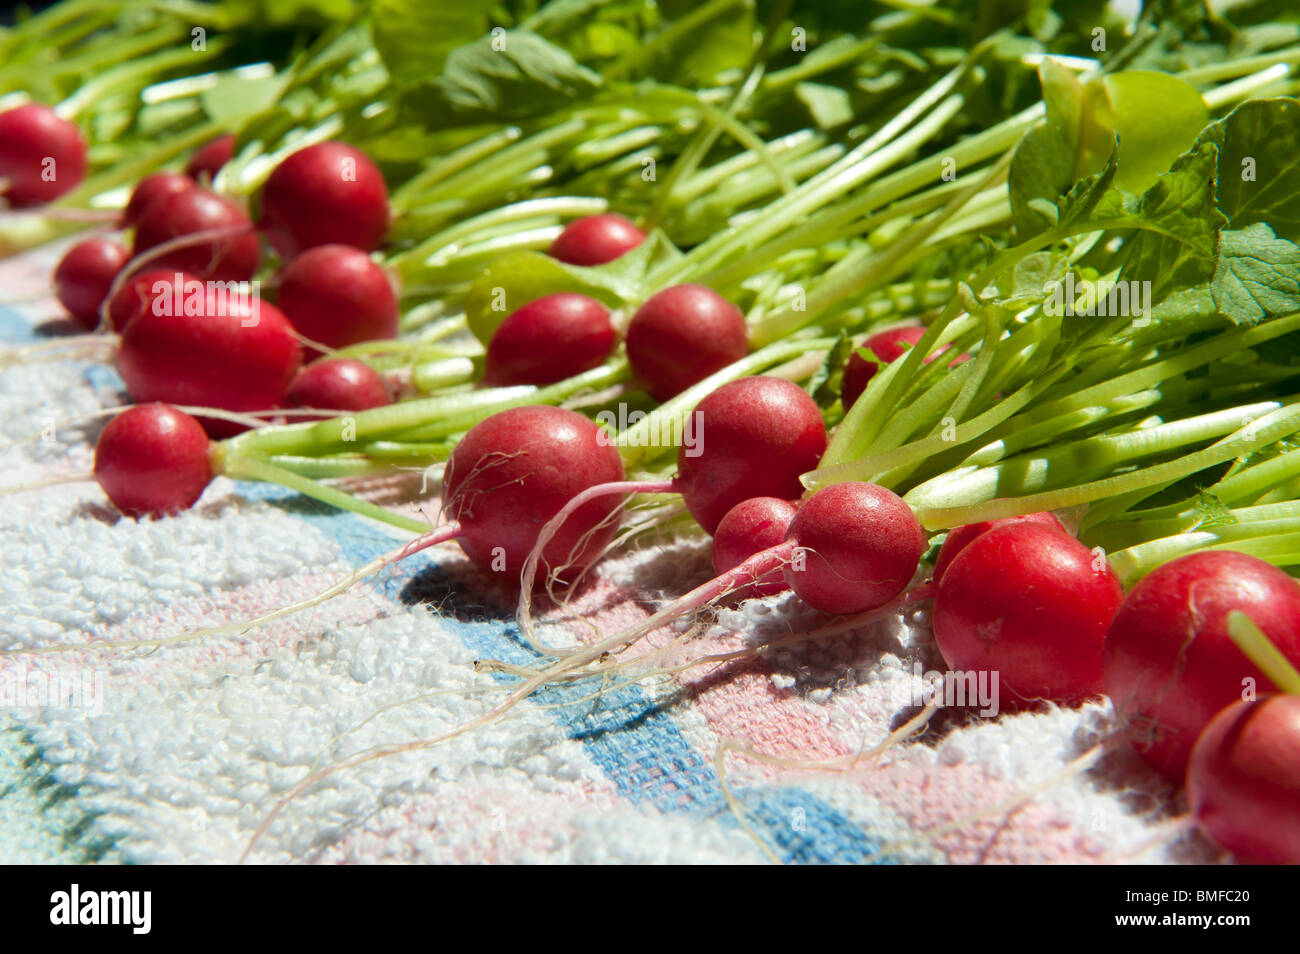 Home grown red radishes drying on kitchen towel after washing Stock Photo